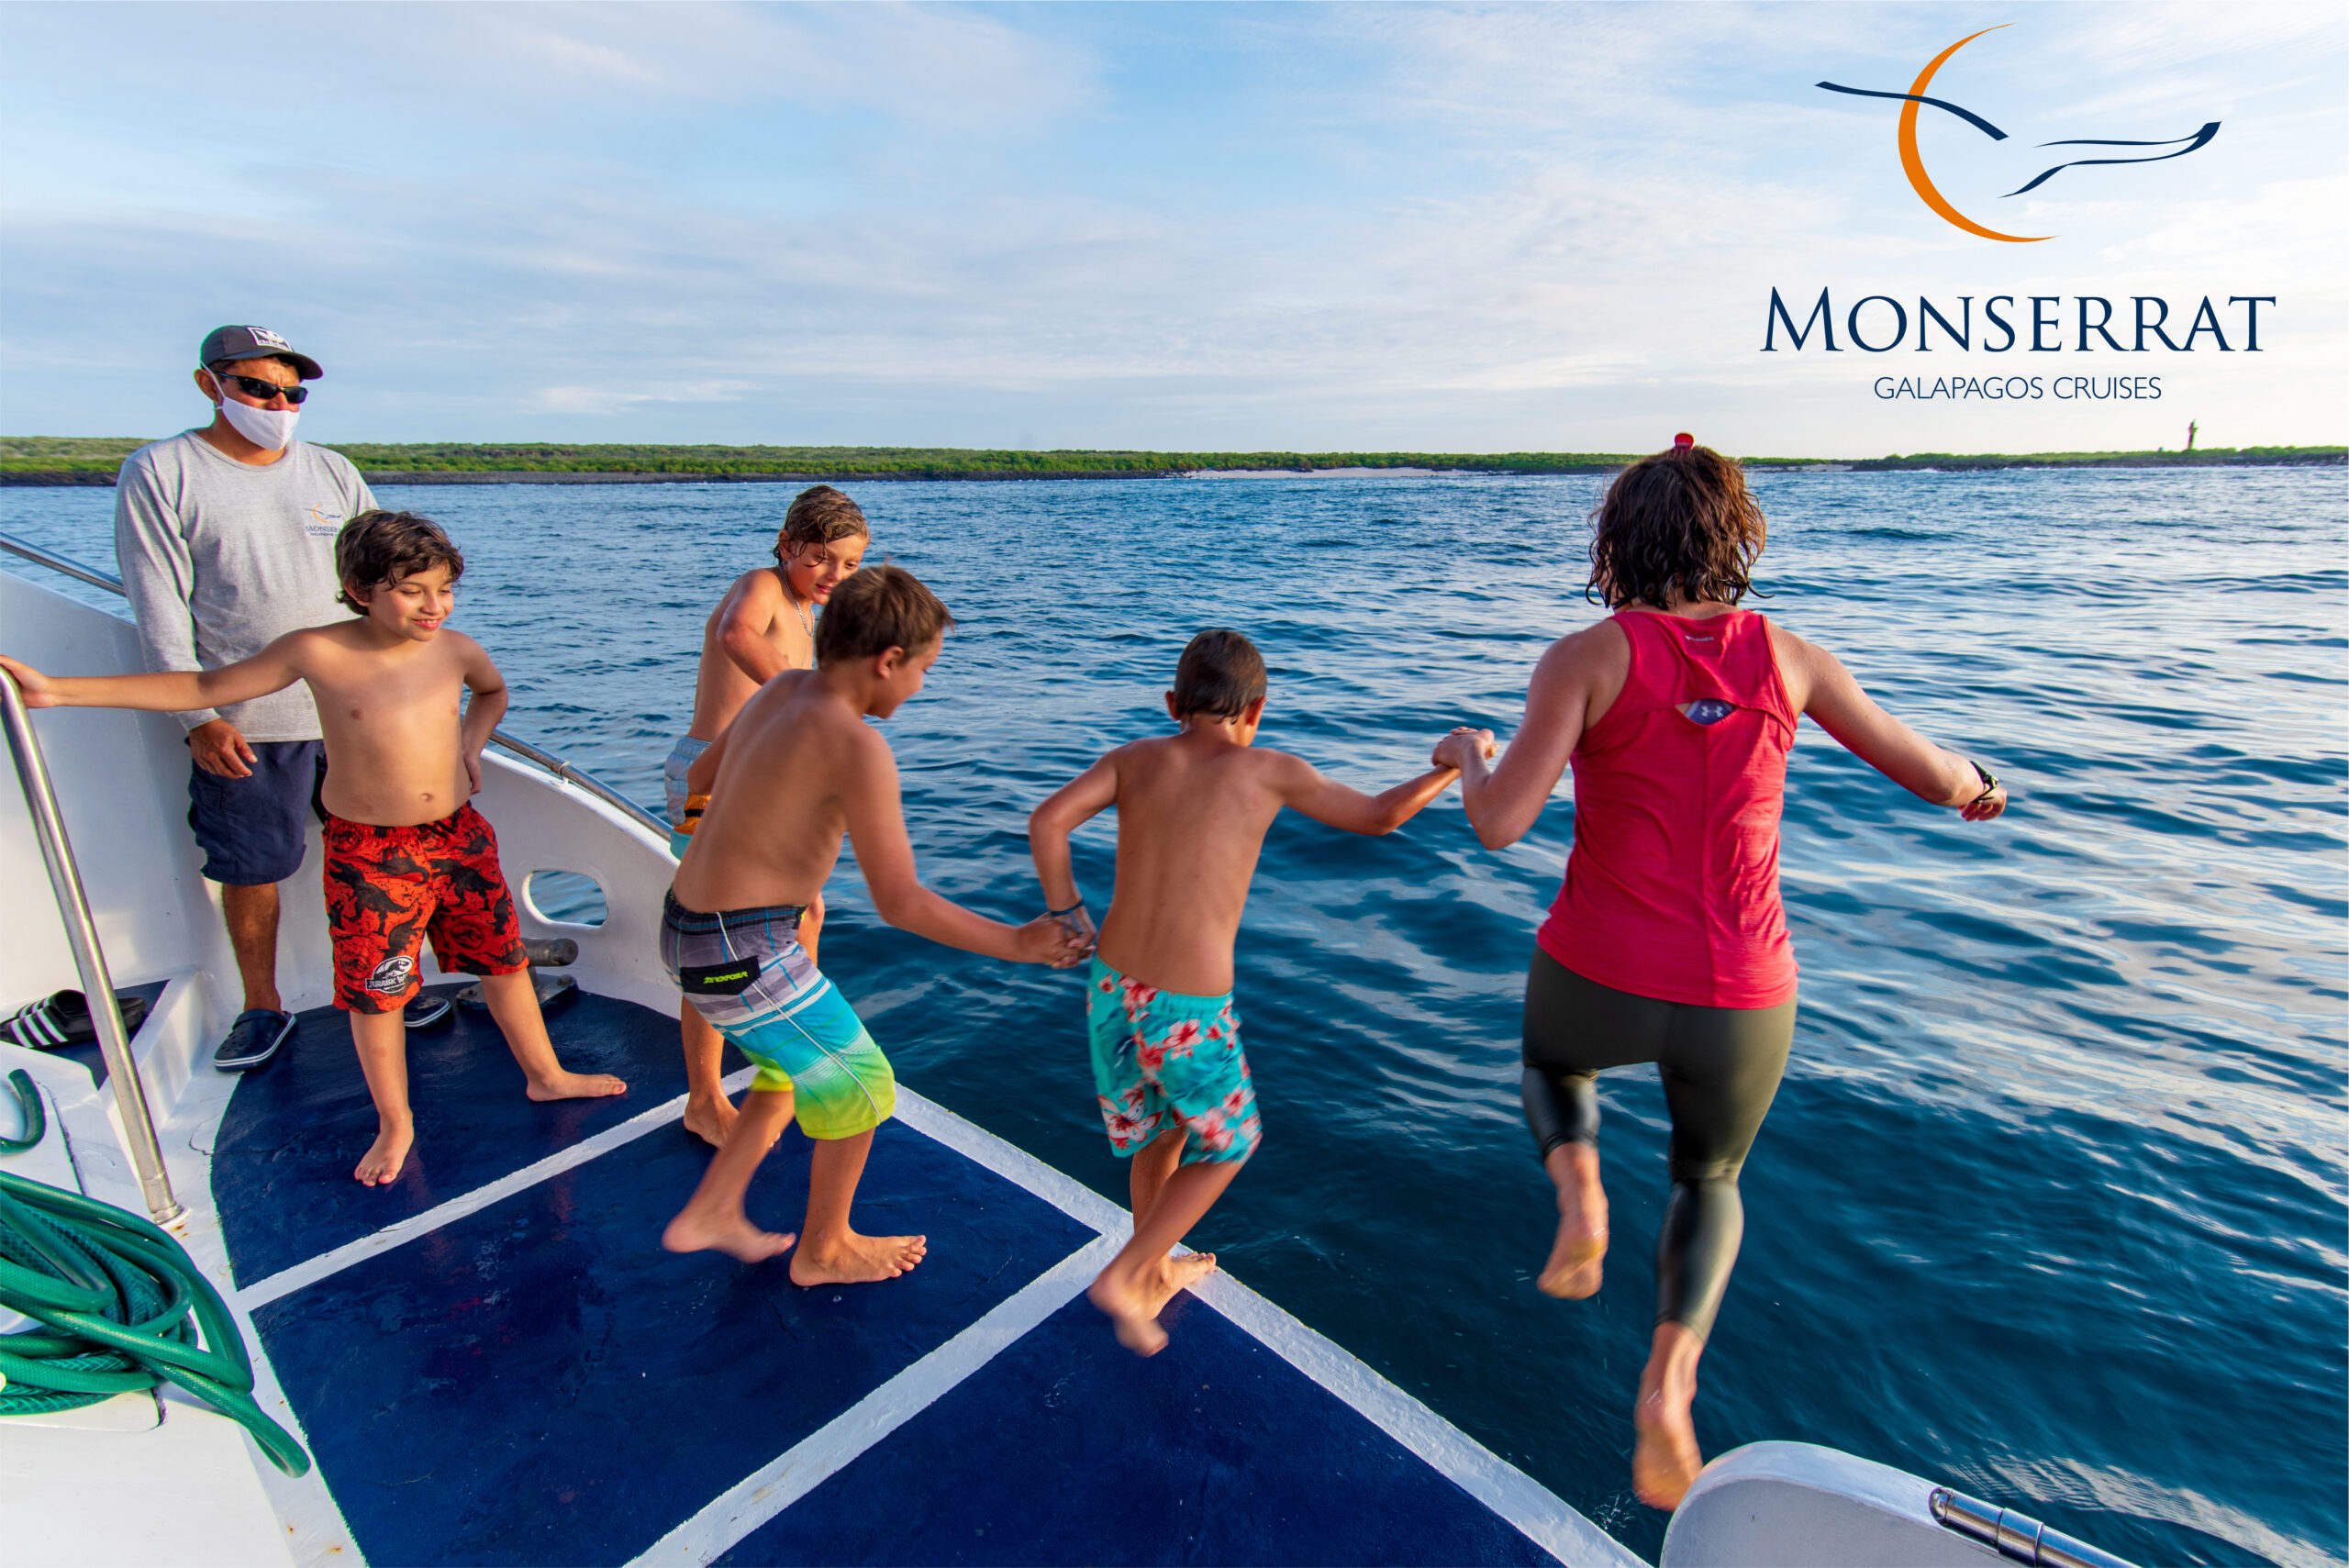 Galatrails - Mapping your adventure Monserrat-Galapagos-Cruises-Guest-Experience-Families-10-High-Res-scaled Monserrat  